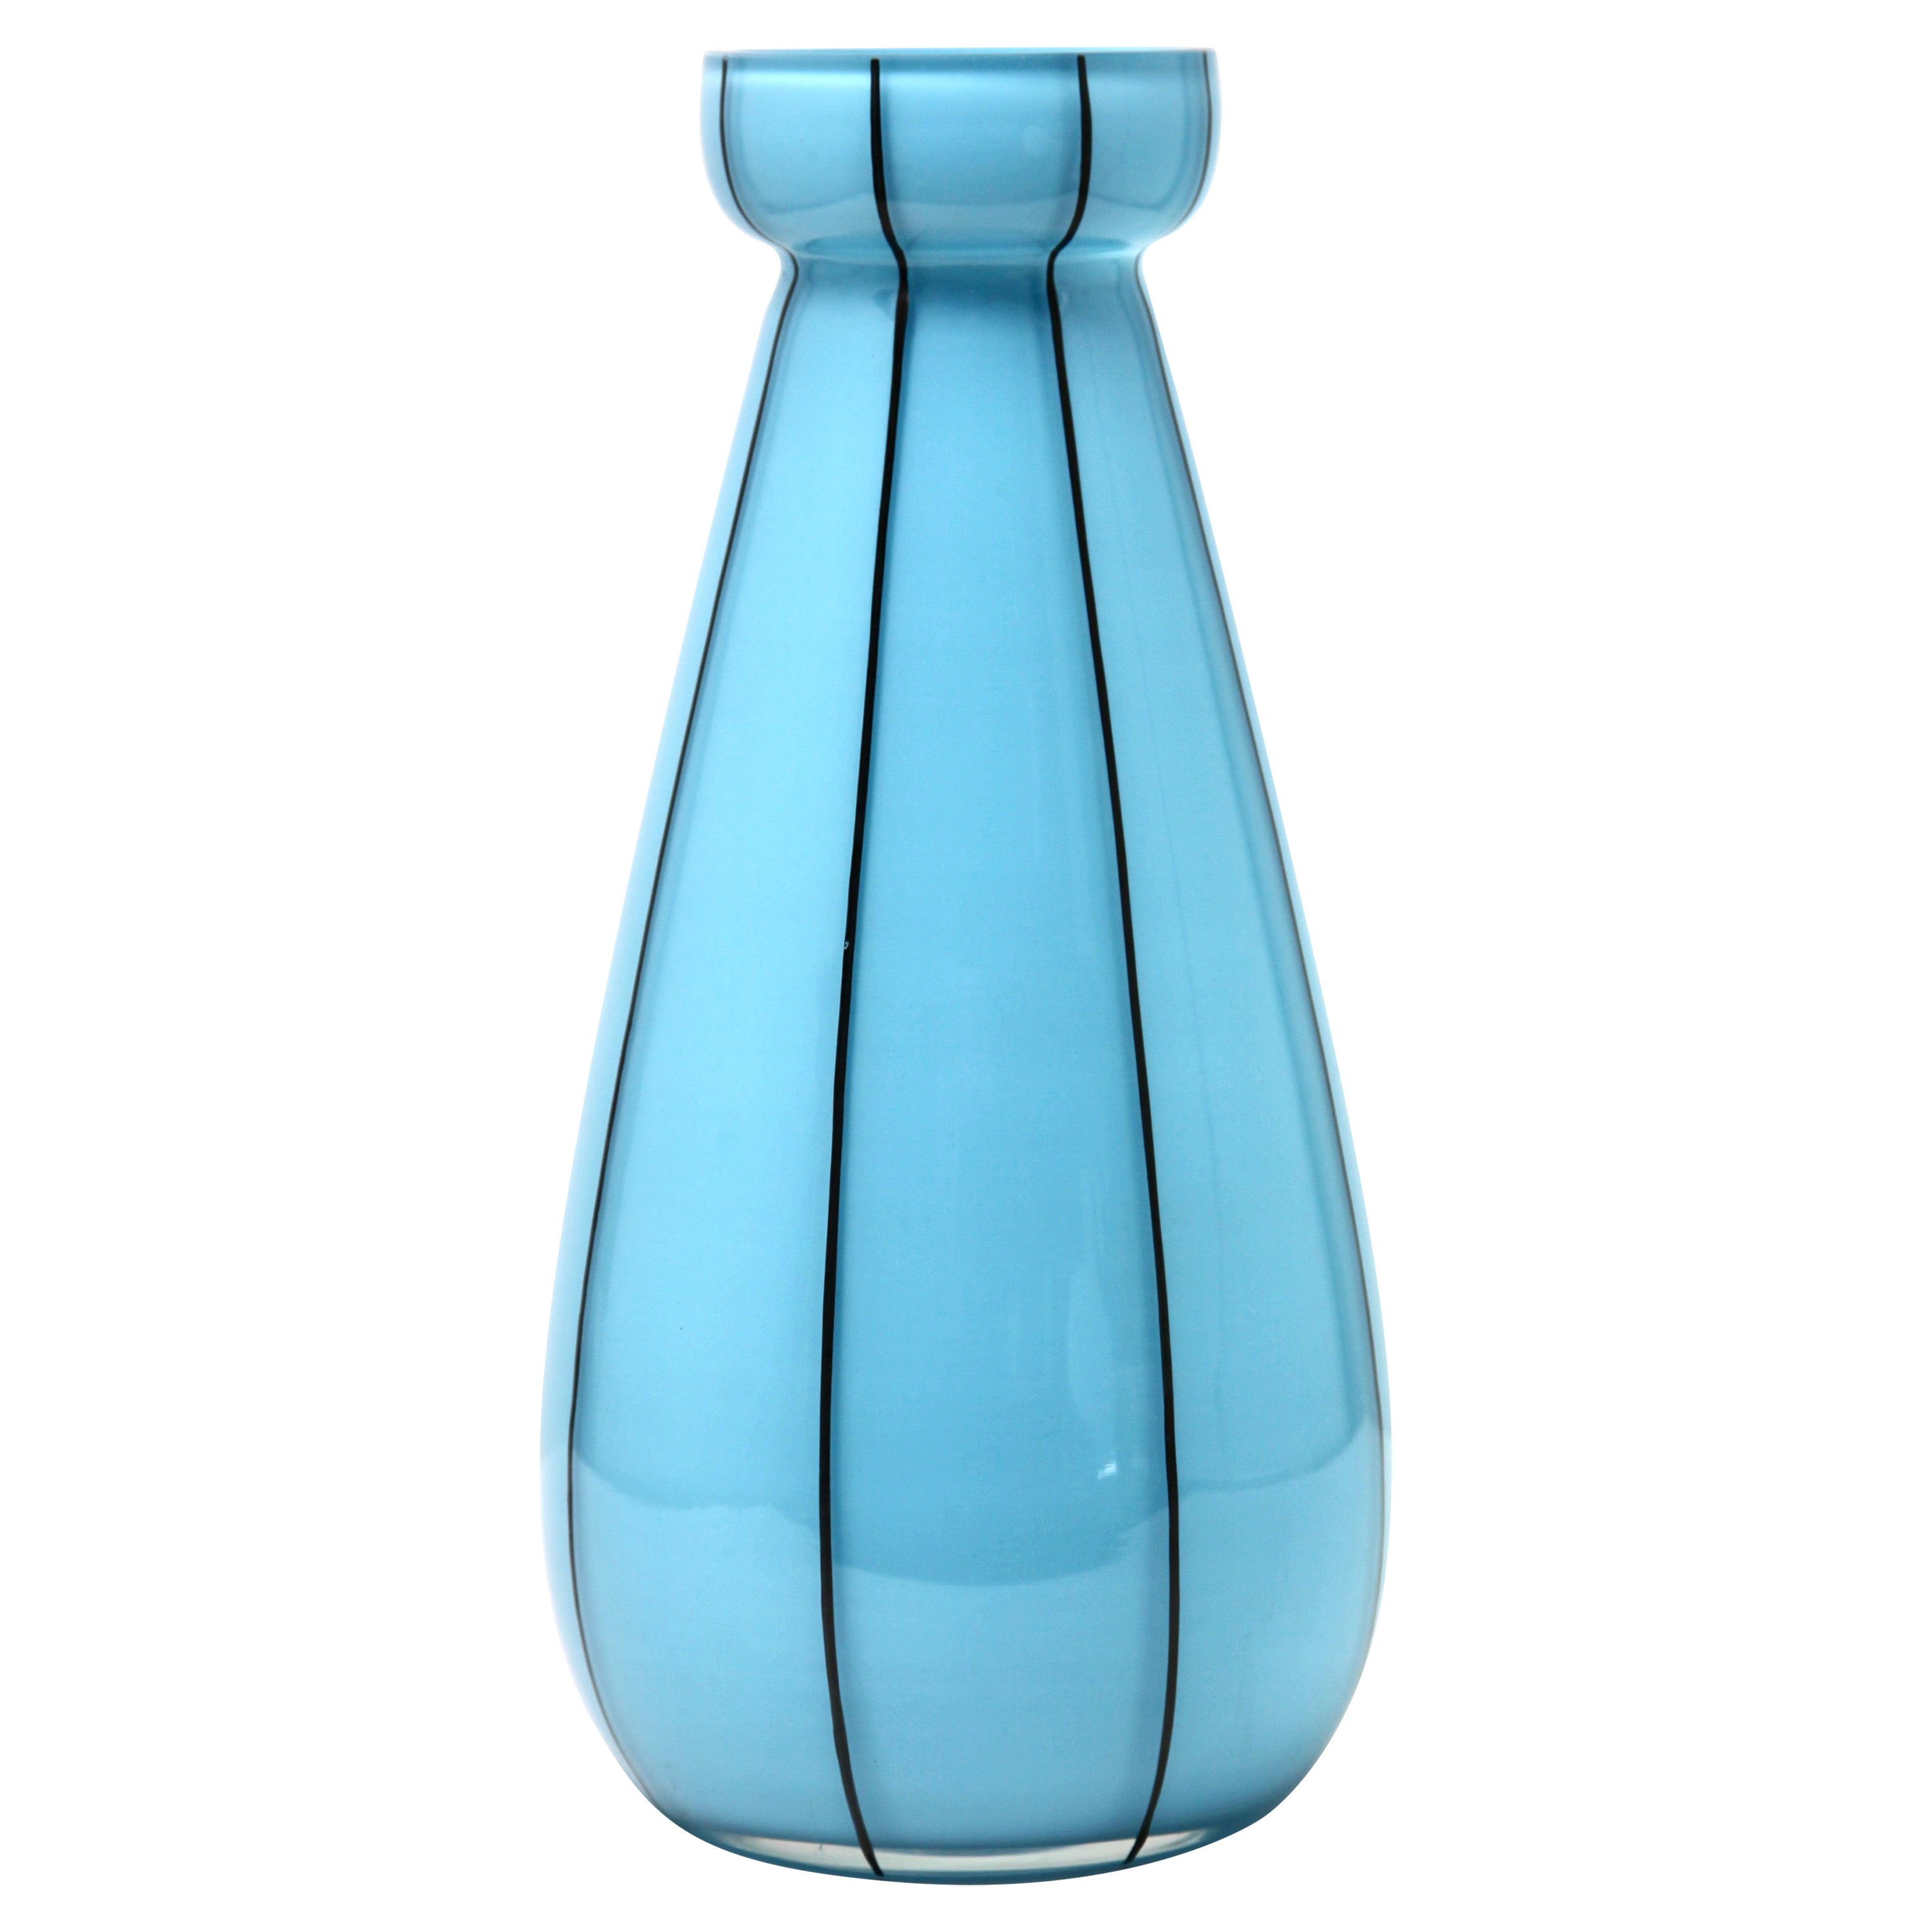 Opaline Glass 'hand painted decorated' Vases in Baby Blue, France